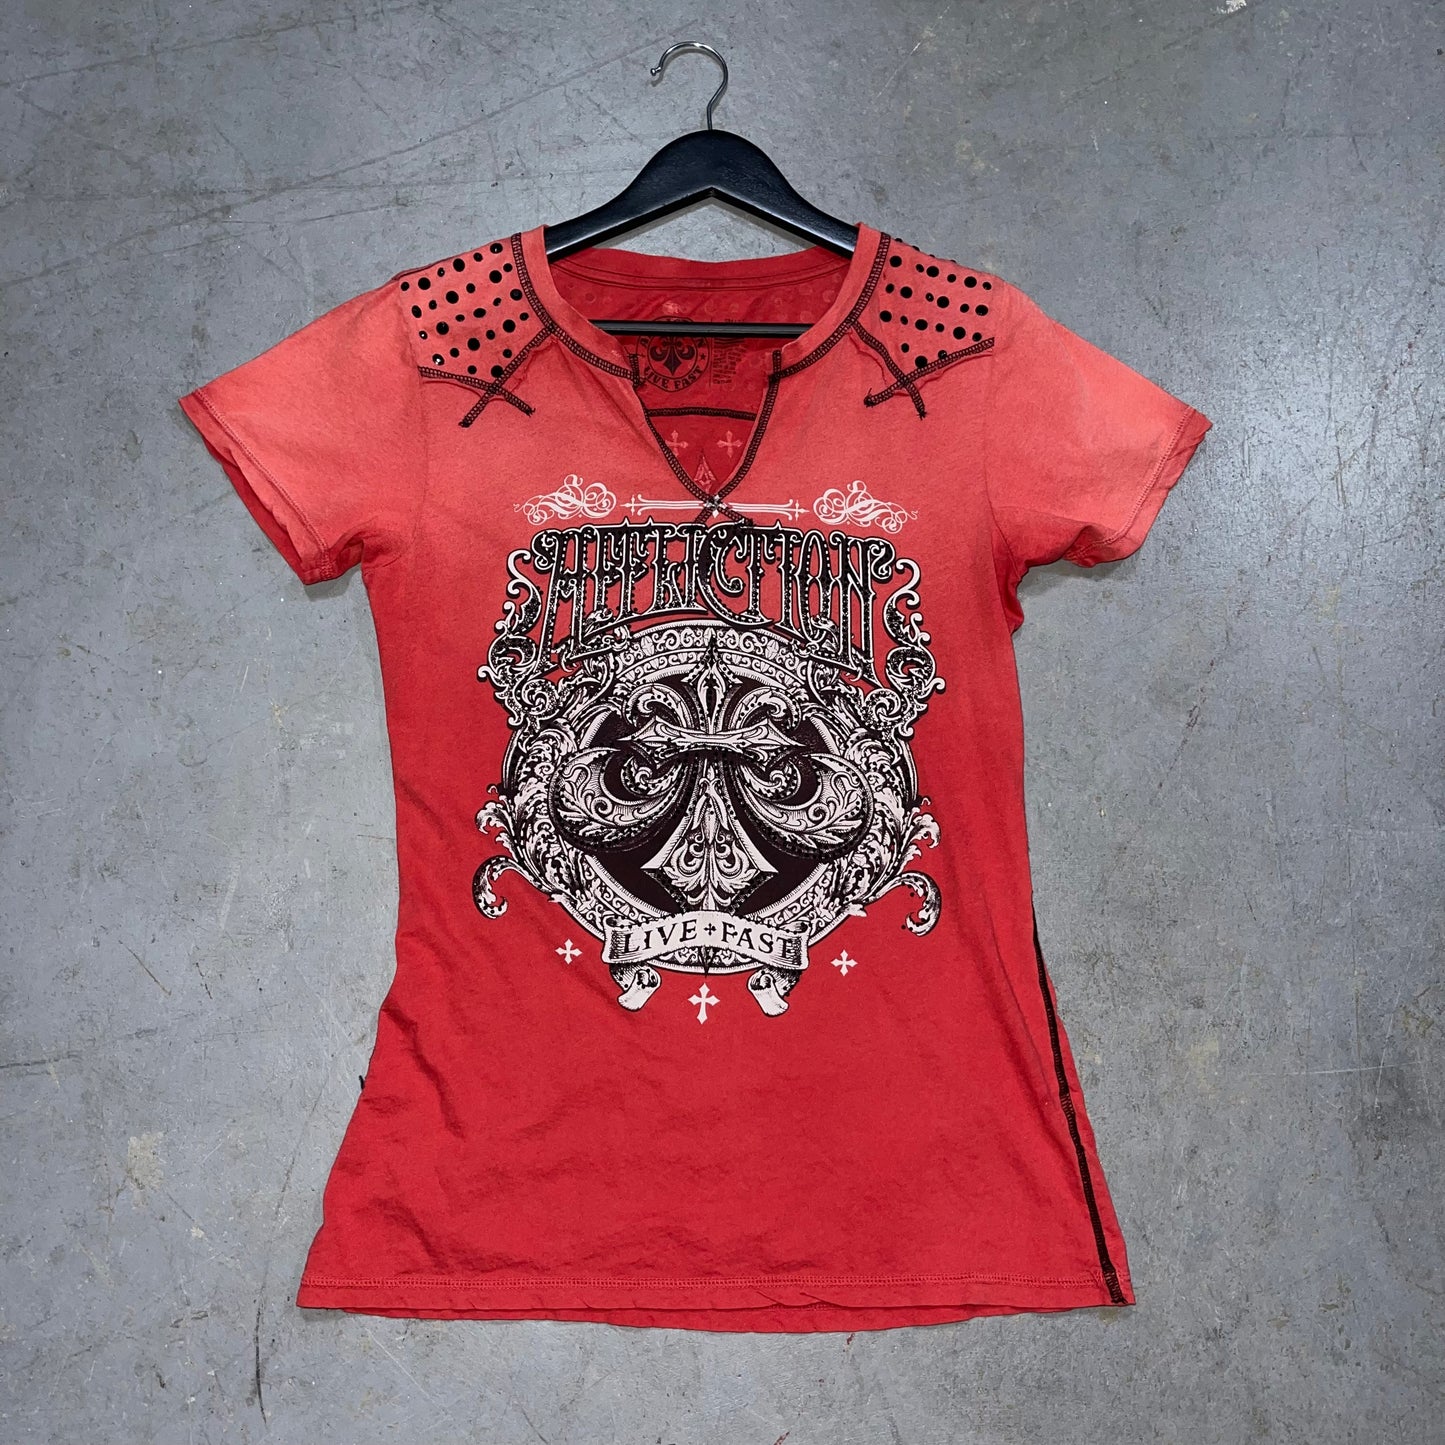 Affliction Woman’s Shirt. Size Small.